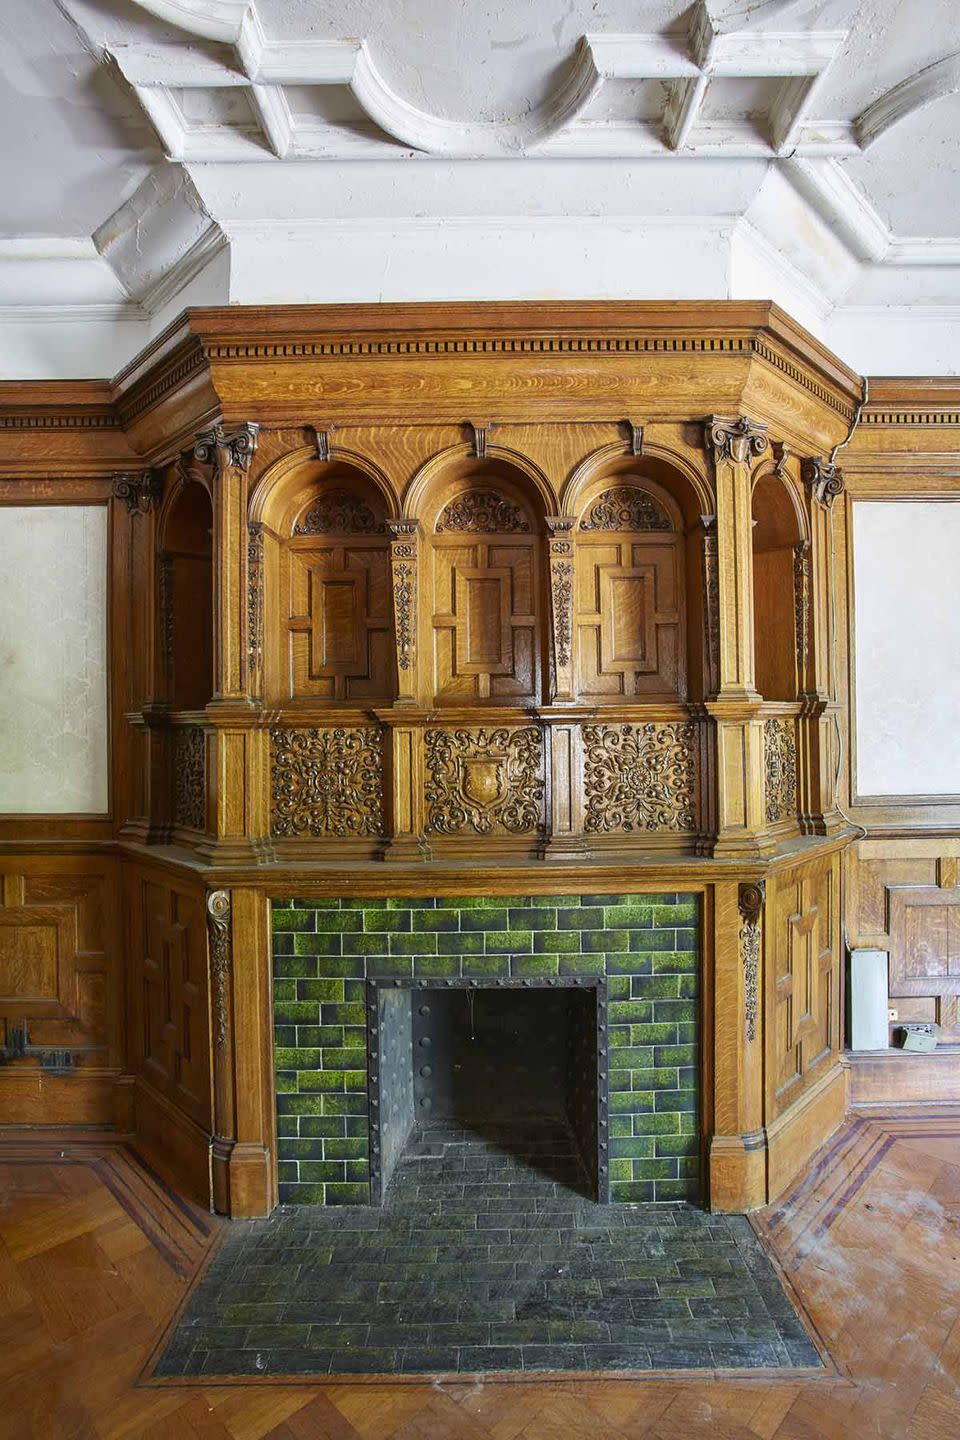 It has several original mantels, including this one with intricate wood details.